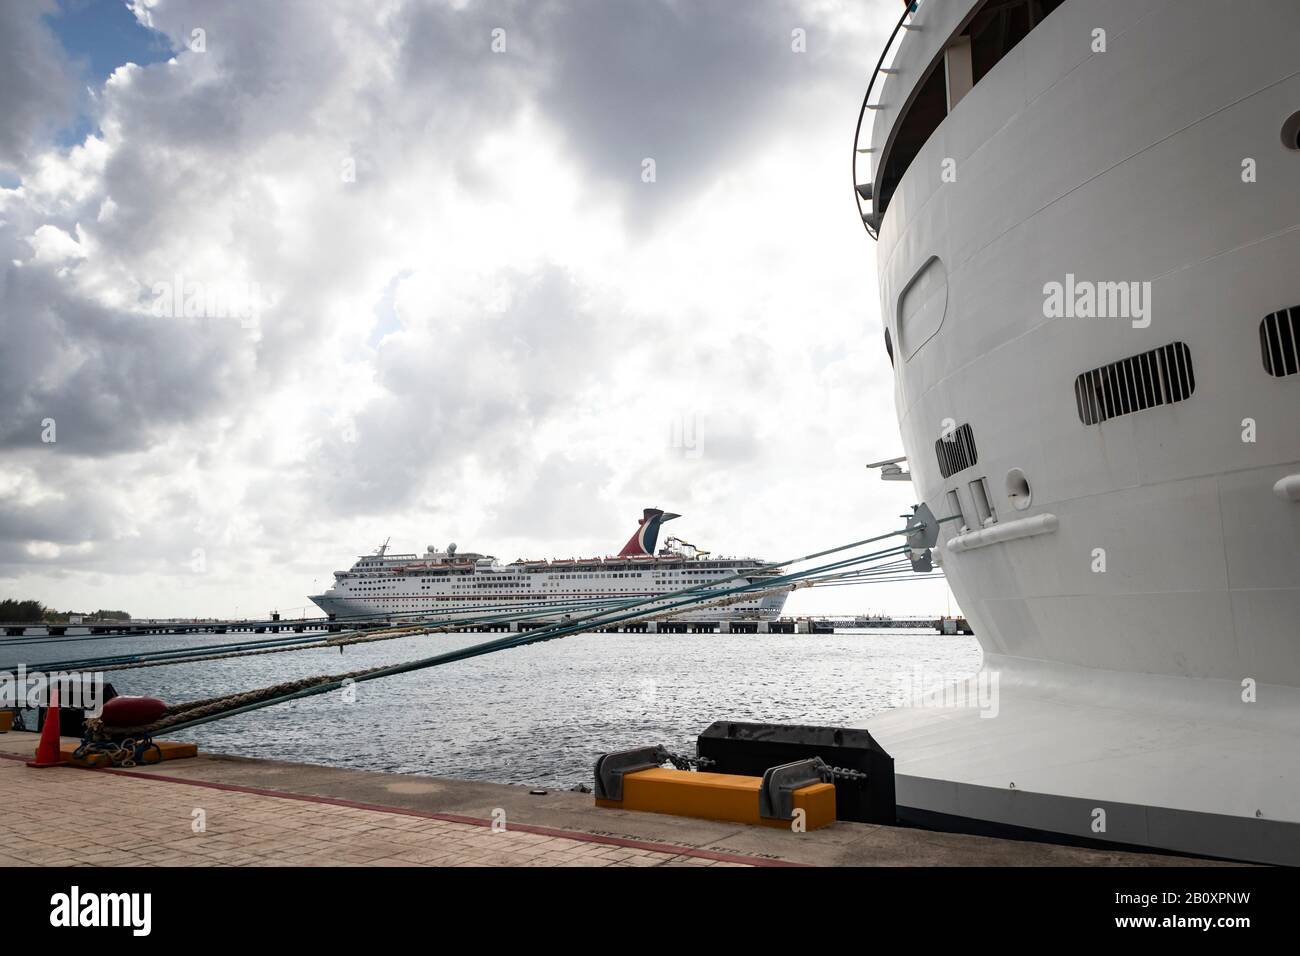 Distant view of 'Carnival Fantasy' cruise ship, at port in Cozumel under bright cloudy skies Stock Photo